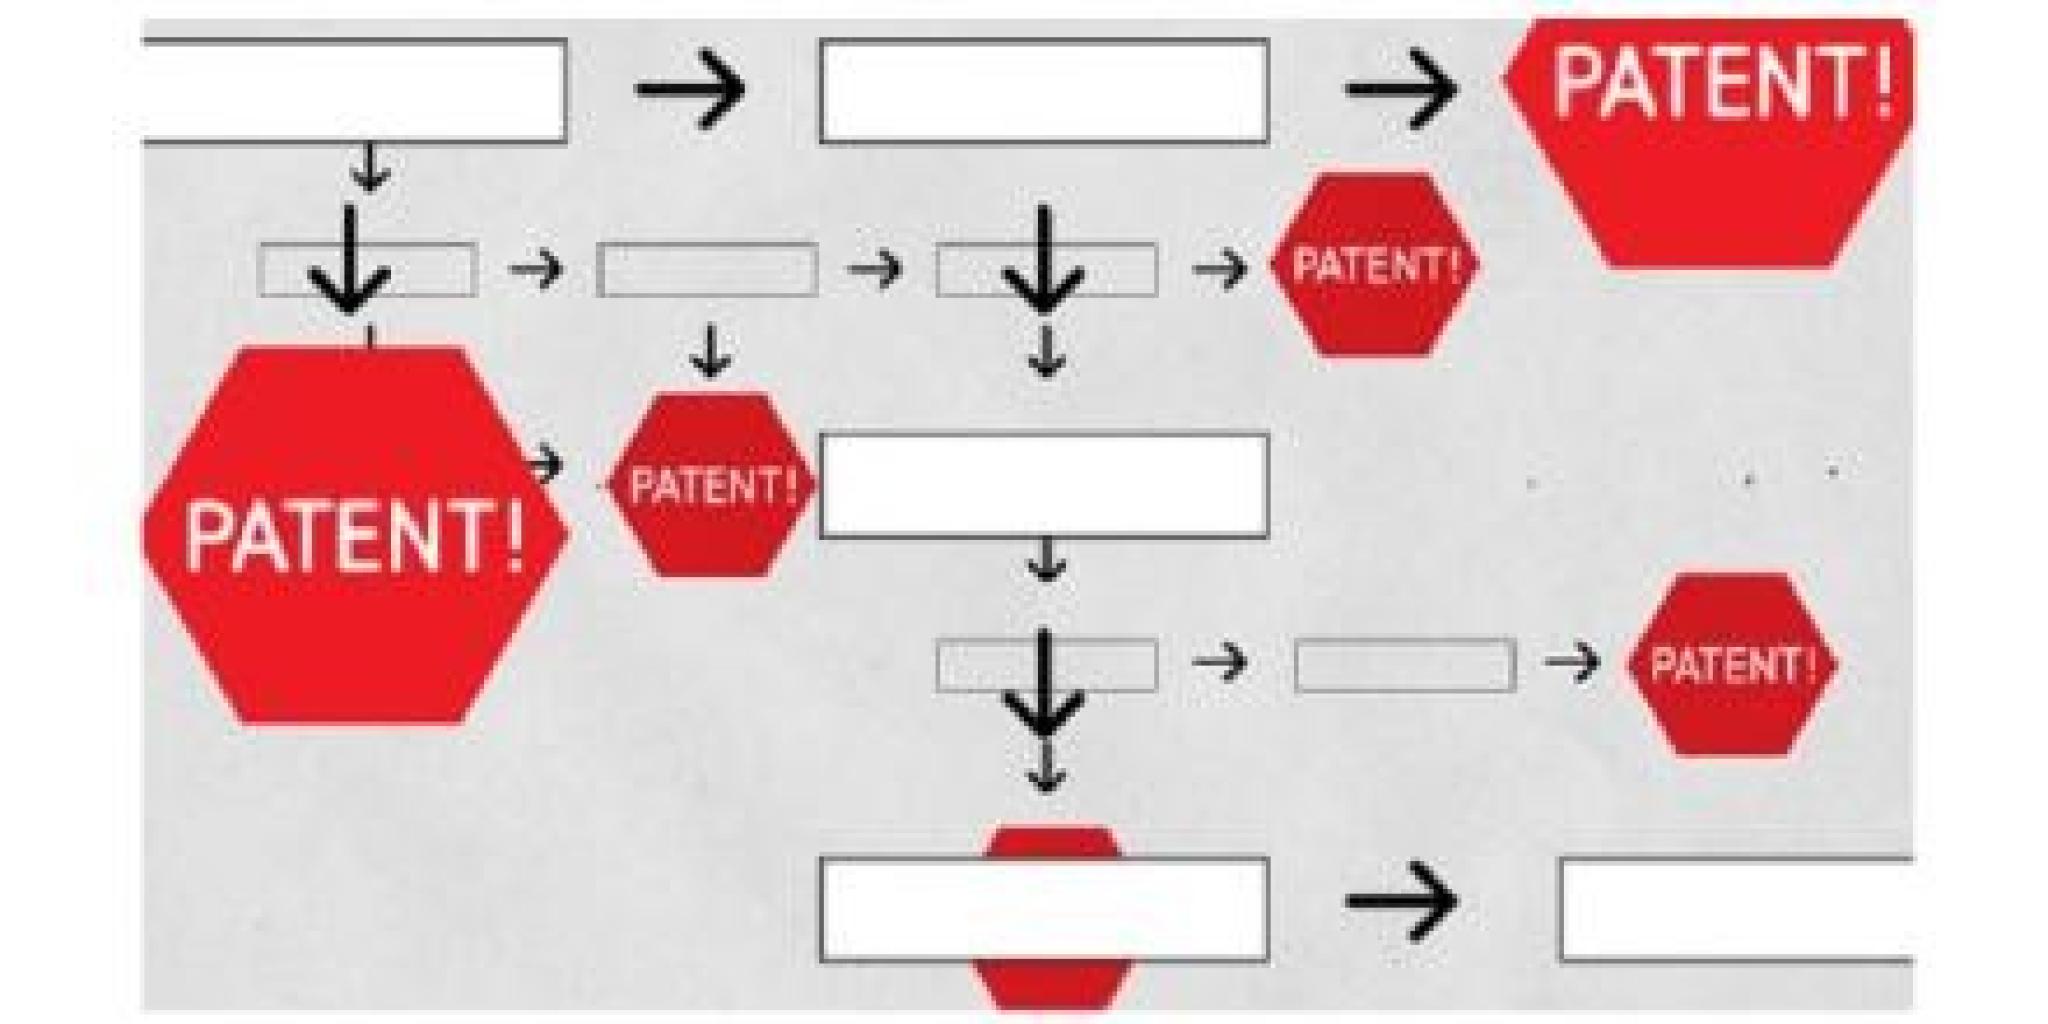 Image credit: Abstract illustration of patent process flowchart by Adrienne Yancey for opensource.com, from flickr, used under CC BY-SA 2.0 licence